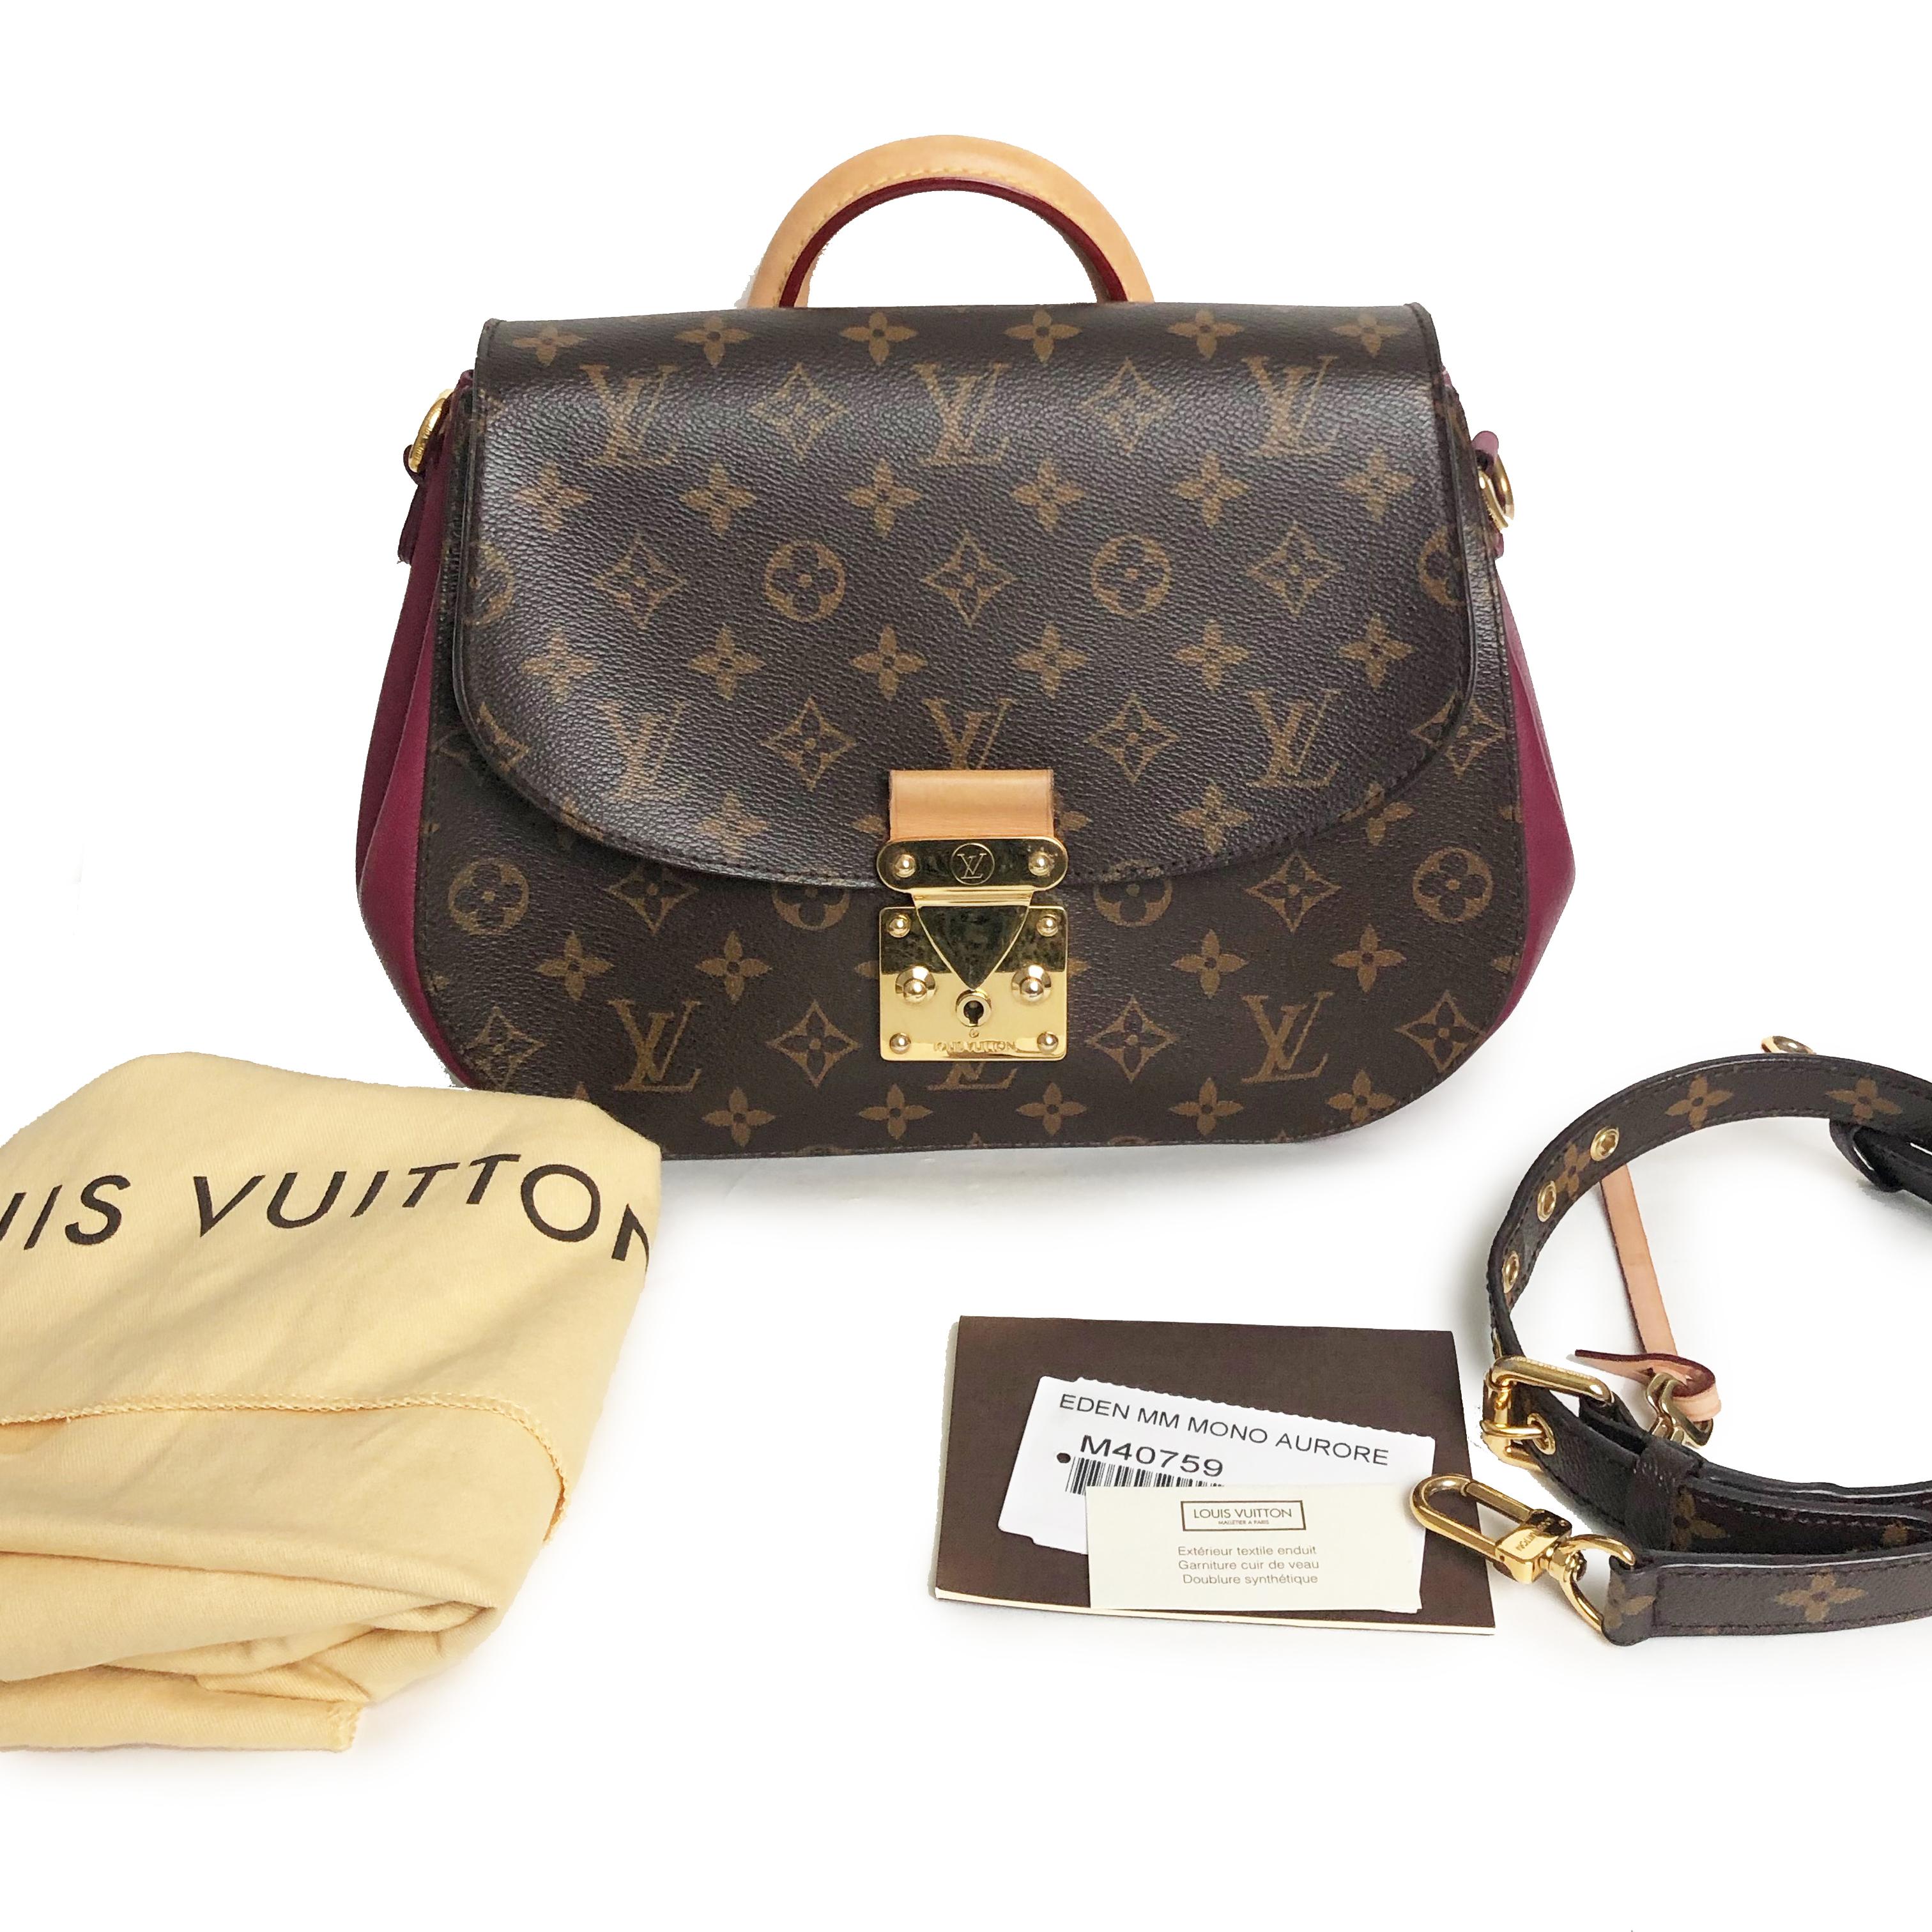 Preowned and authentic Louis Vuitton Eden MM Monogram Aurore Shoulder Bag with shoulder strap, keys and dust bag, made in 2012. Great bag from Louis Vuitton that can be worn on the shoulder or carried by it's top handle! Approximate measurements: